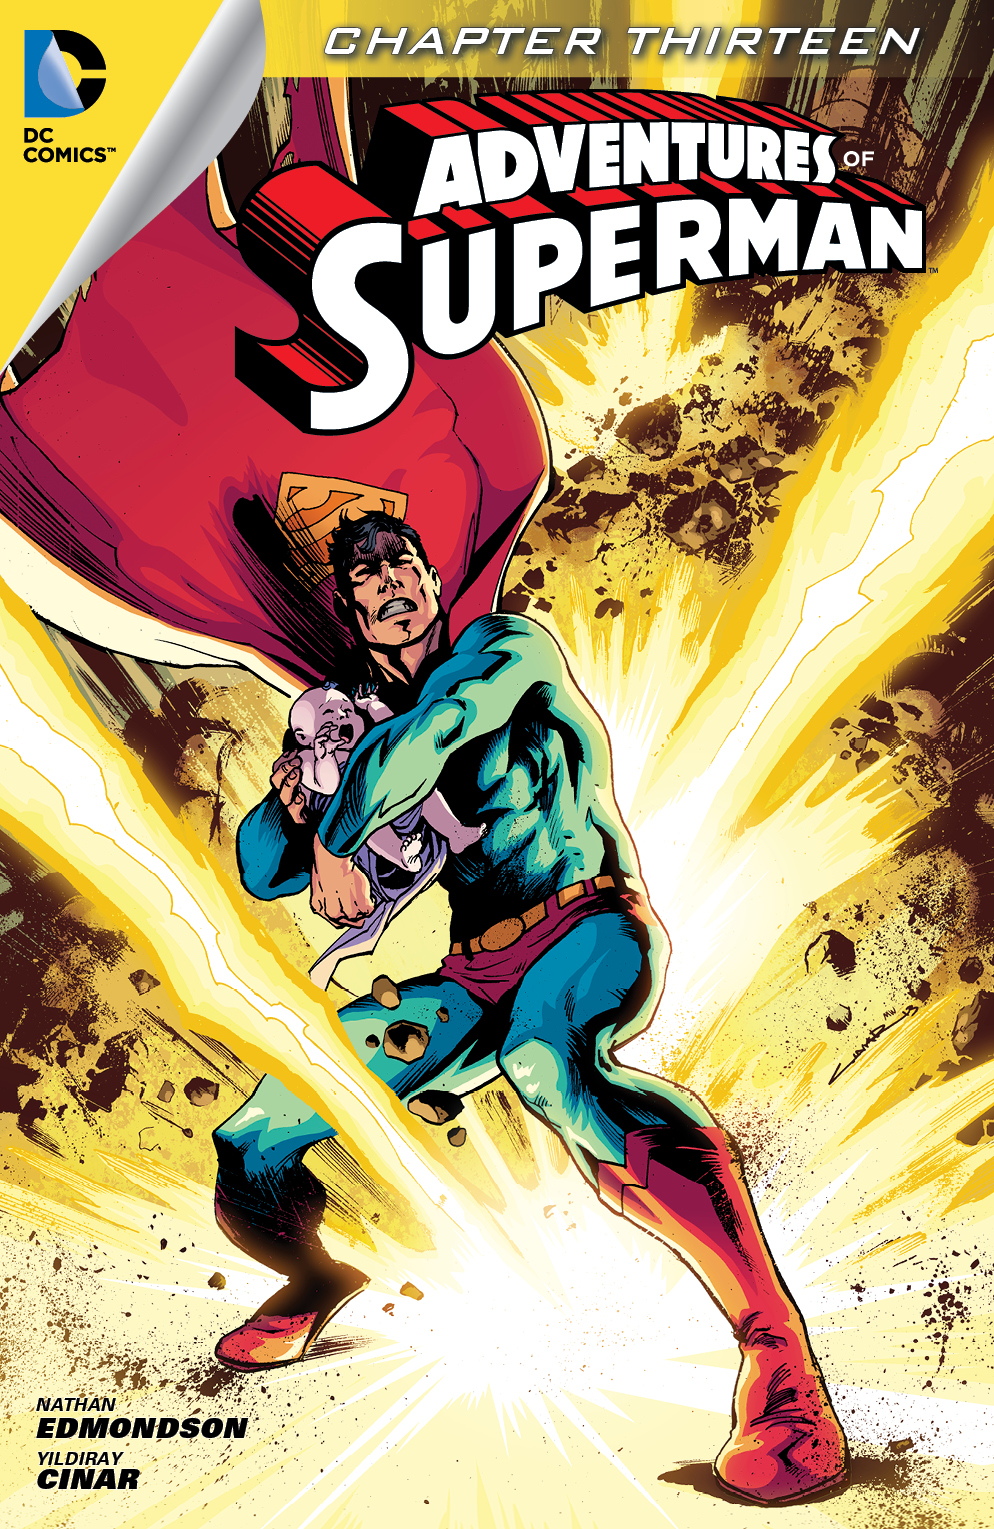 Adventures of Superman (2013-) #13 preview images